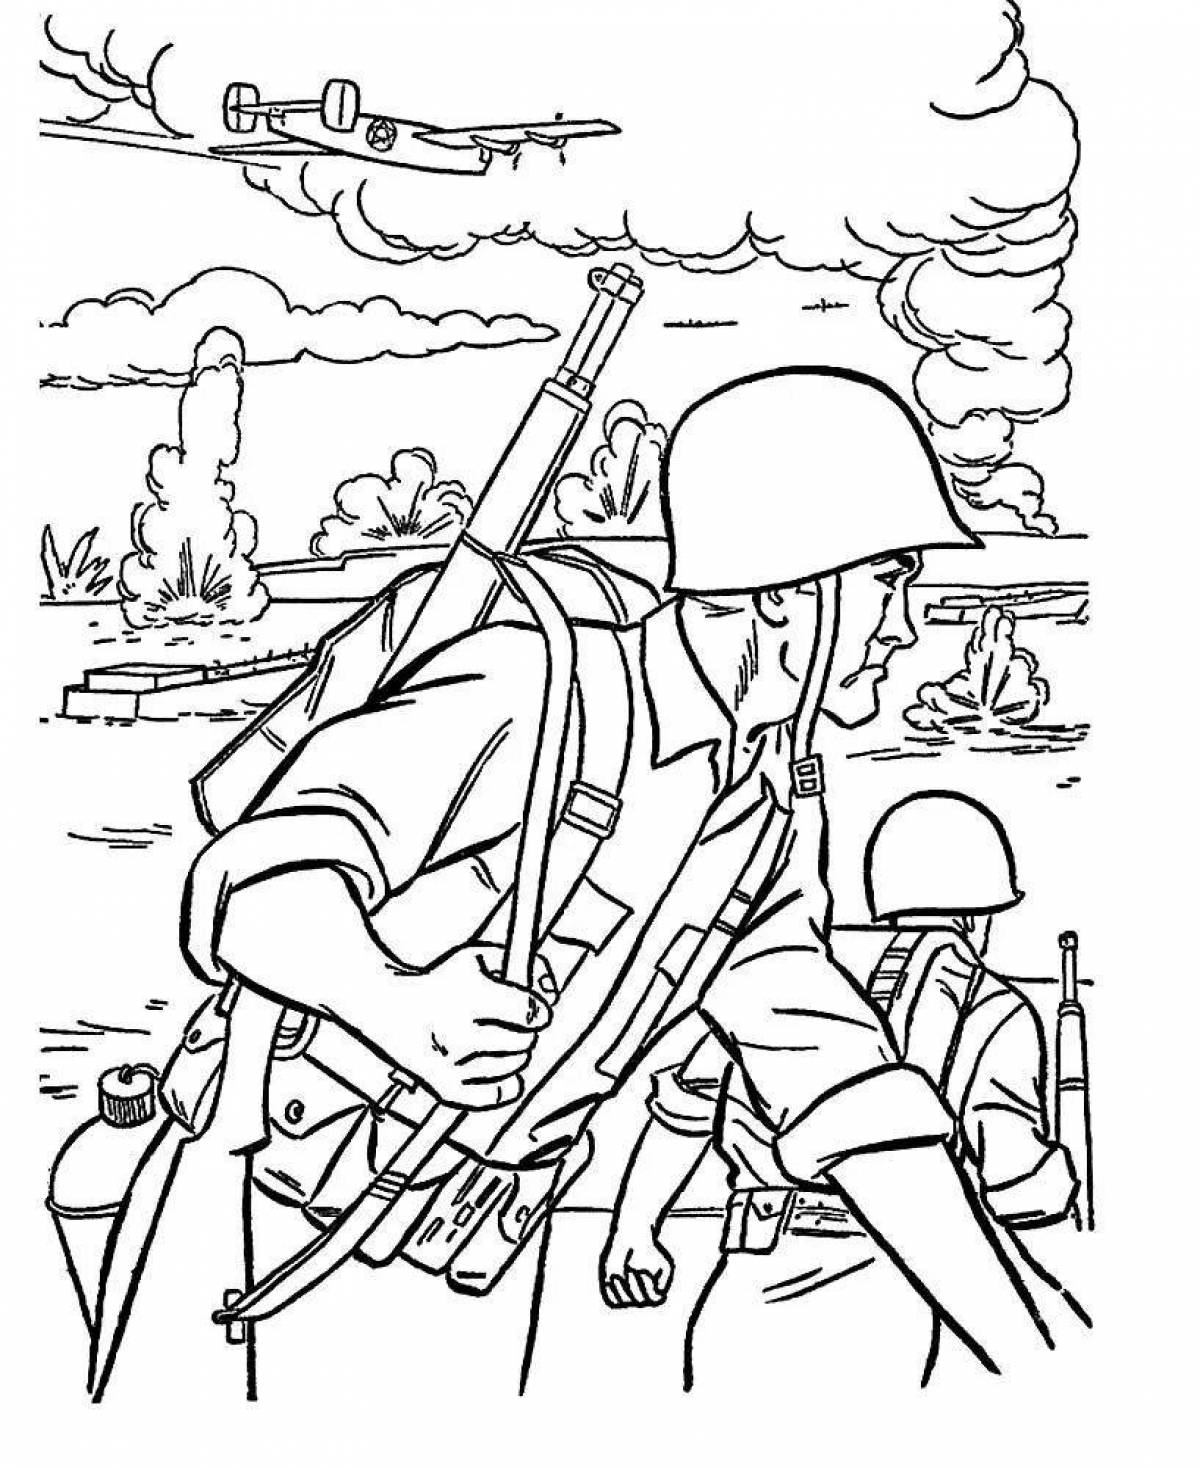 Royal soldier coloring book for kids